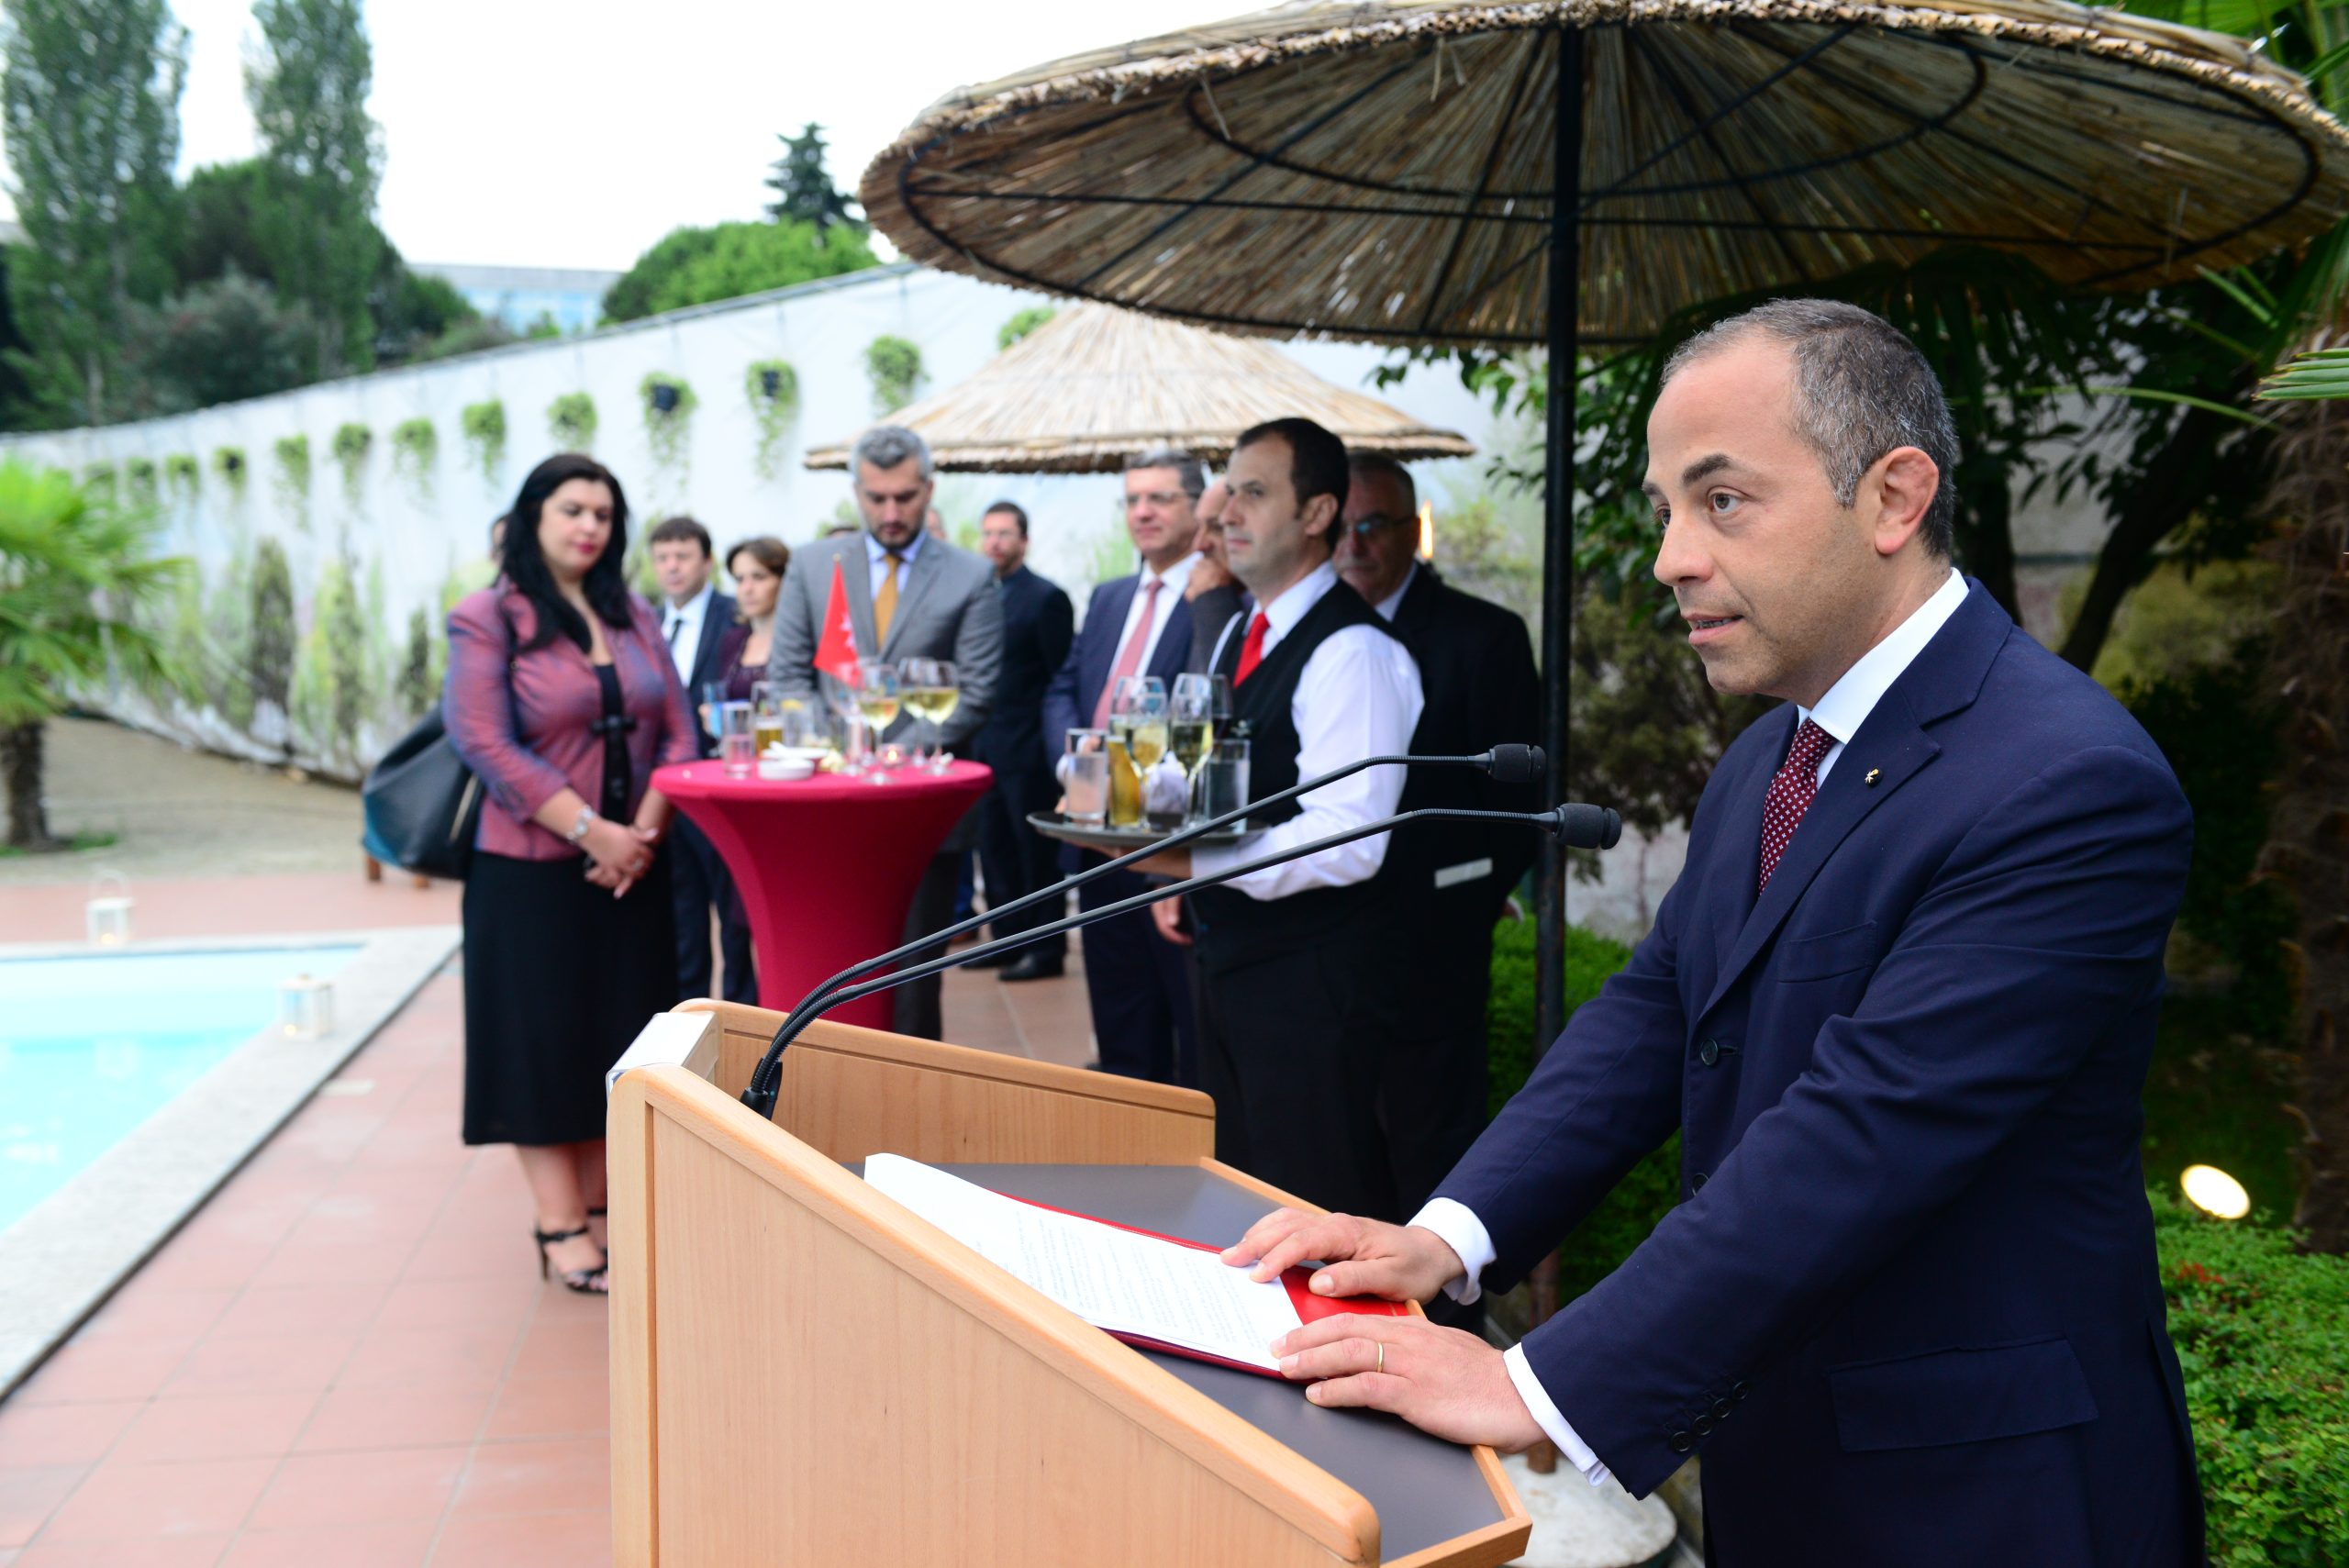 Ambassador Stefano Palumbo hosts annual reception on the occasion of the Solemnity of St. John the Baptist